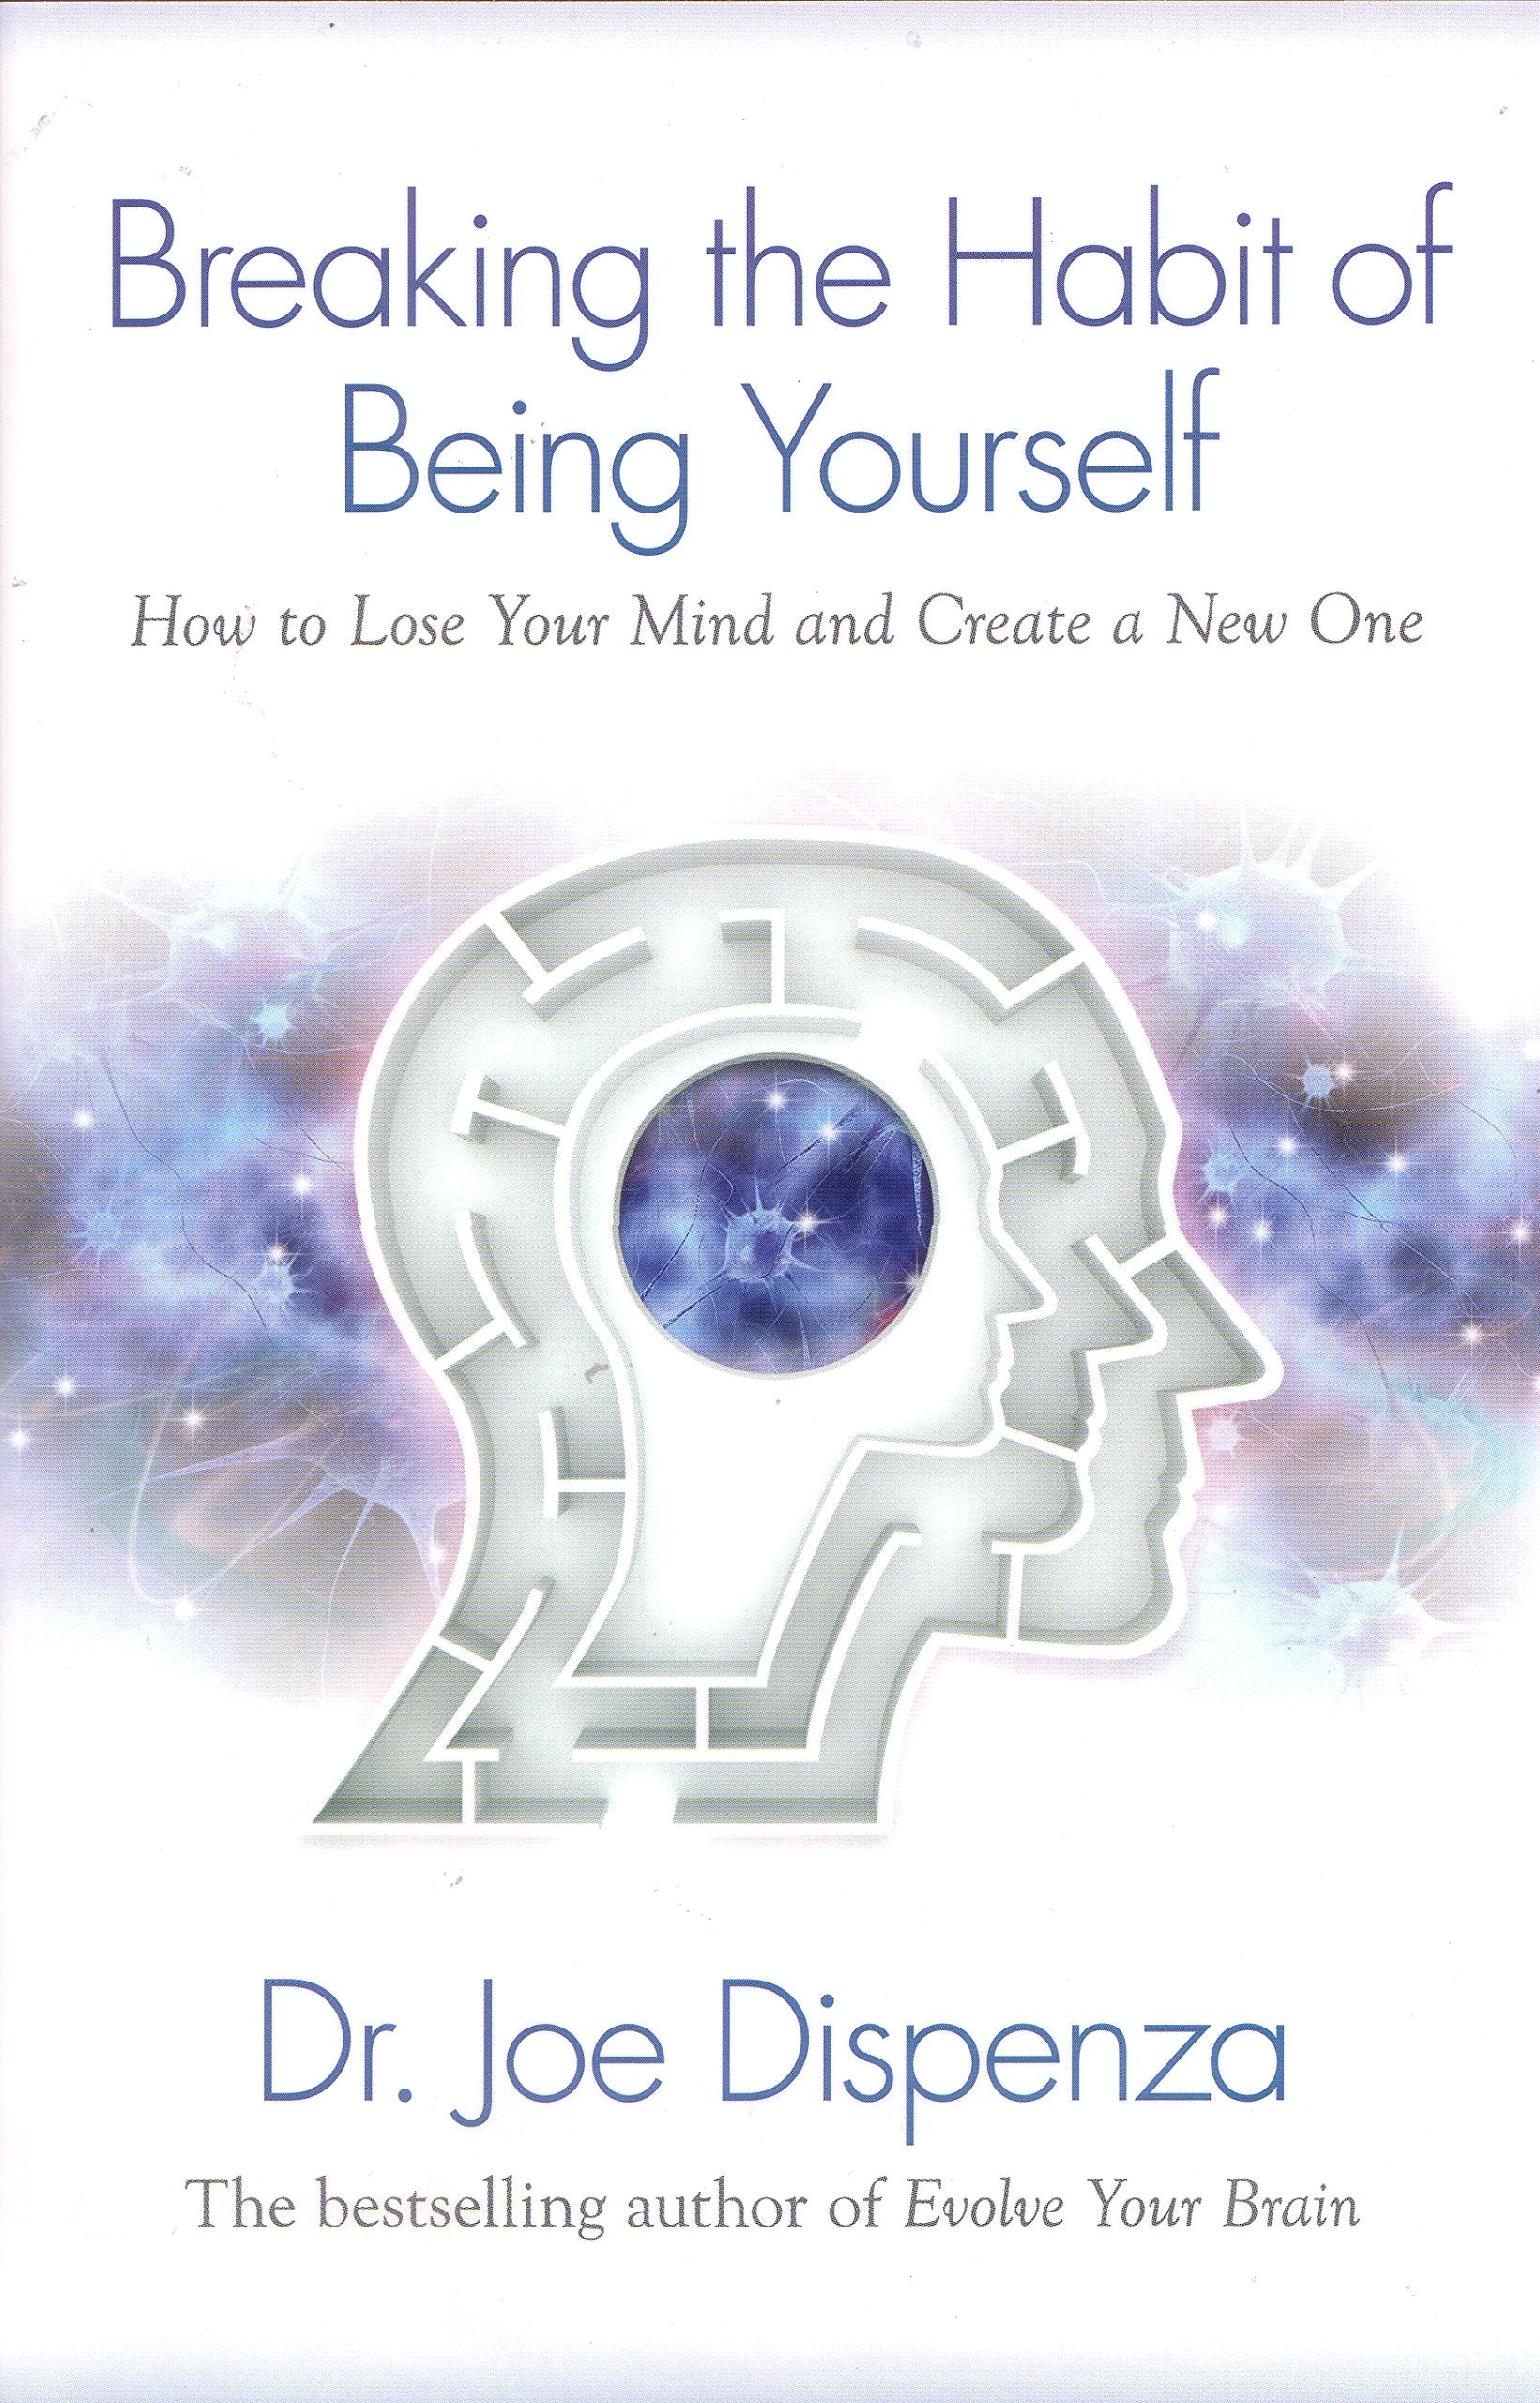 Breaking The Habit of Being Yourself: How to Lose Your Mind and Create a New One Paperback by Dr. Joe Dispenza